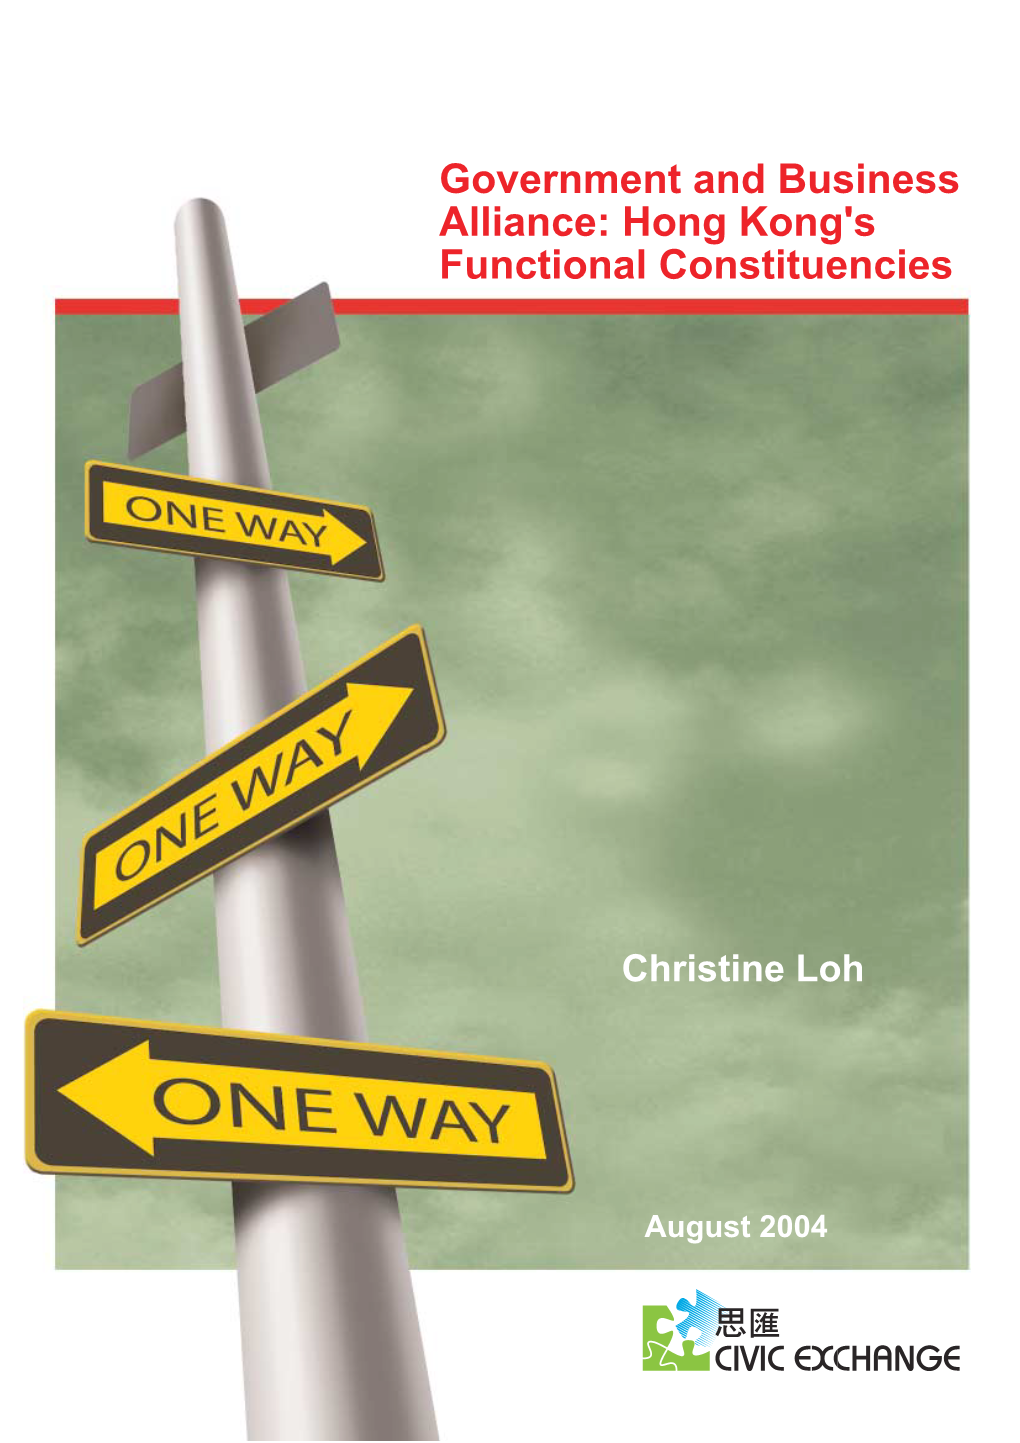 Government and Business Alliance: Hong Kong's Functional Constituencies